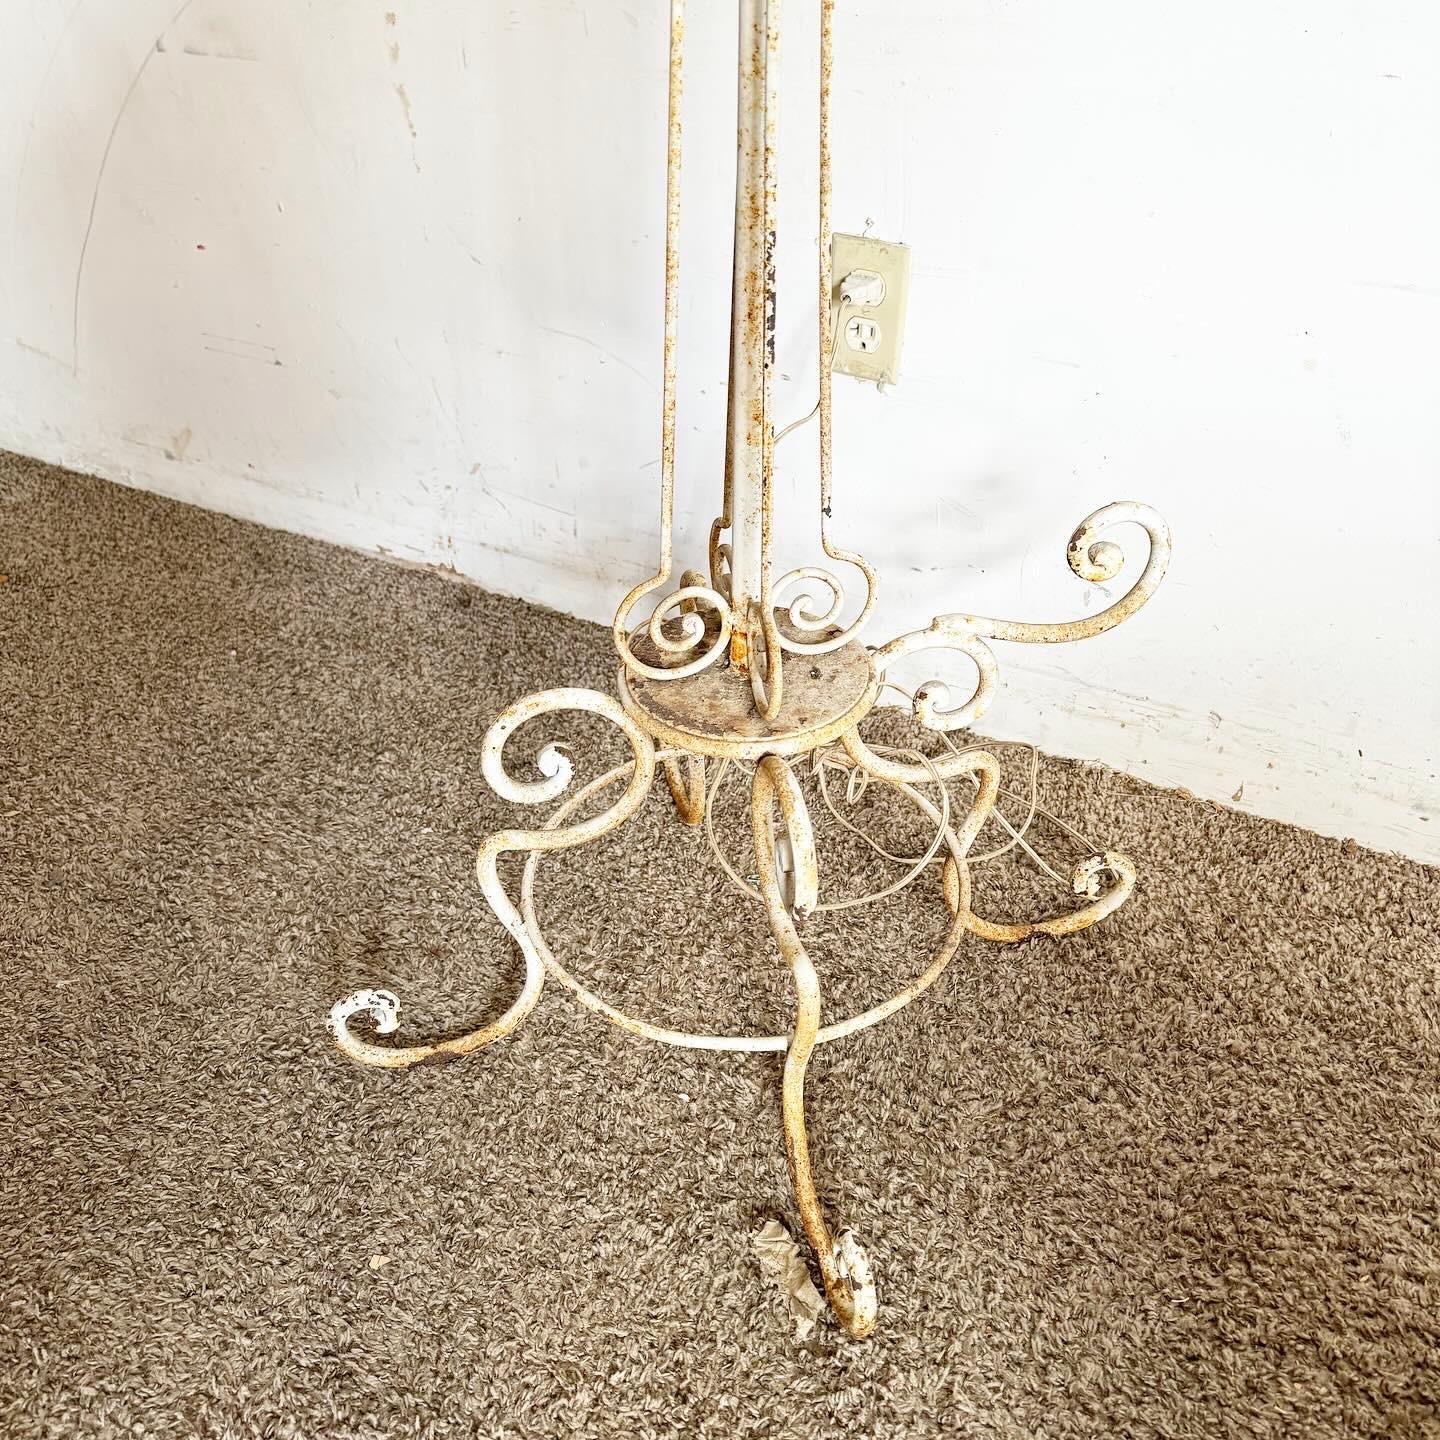 20th Century Vintage Wrought Iron Painted White Floor Lamp For Sale